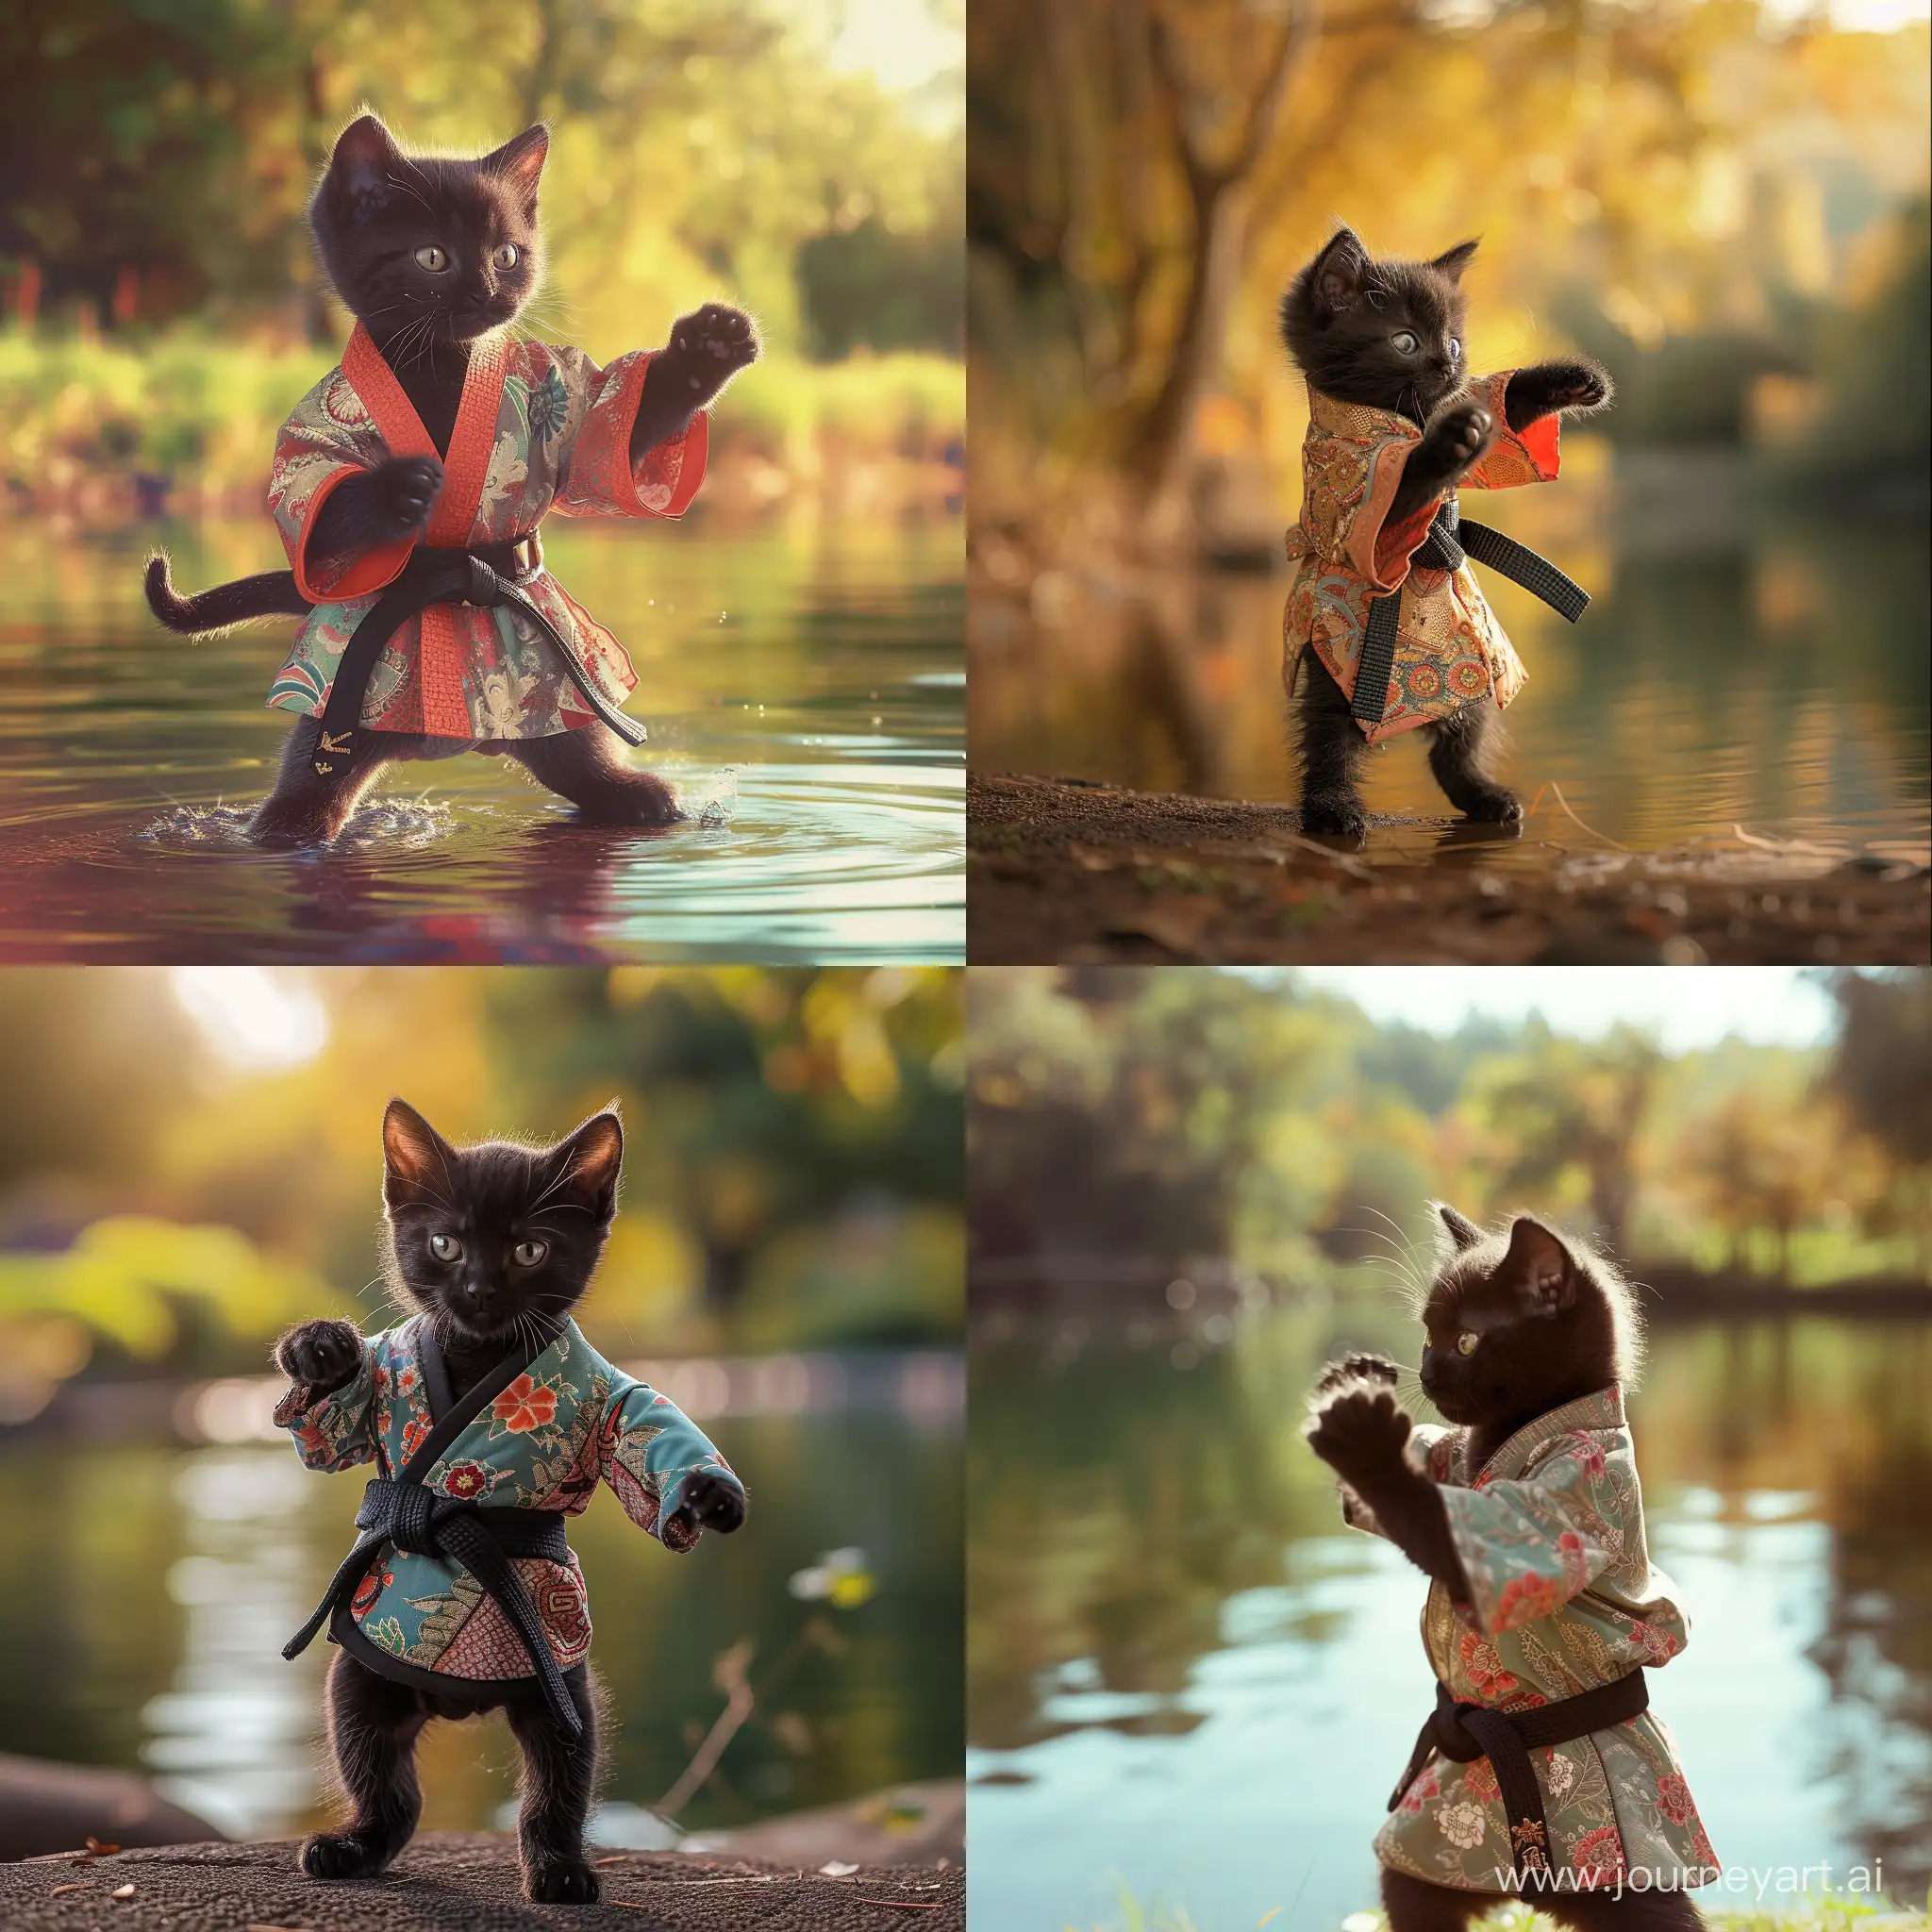 Cute-Black-Cat-Cub-Practicing-Karate-in-Traditional-Kimono-by-Lake